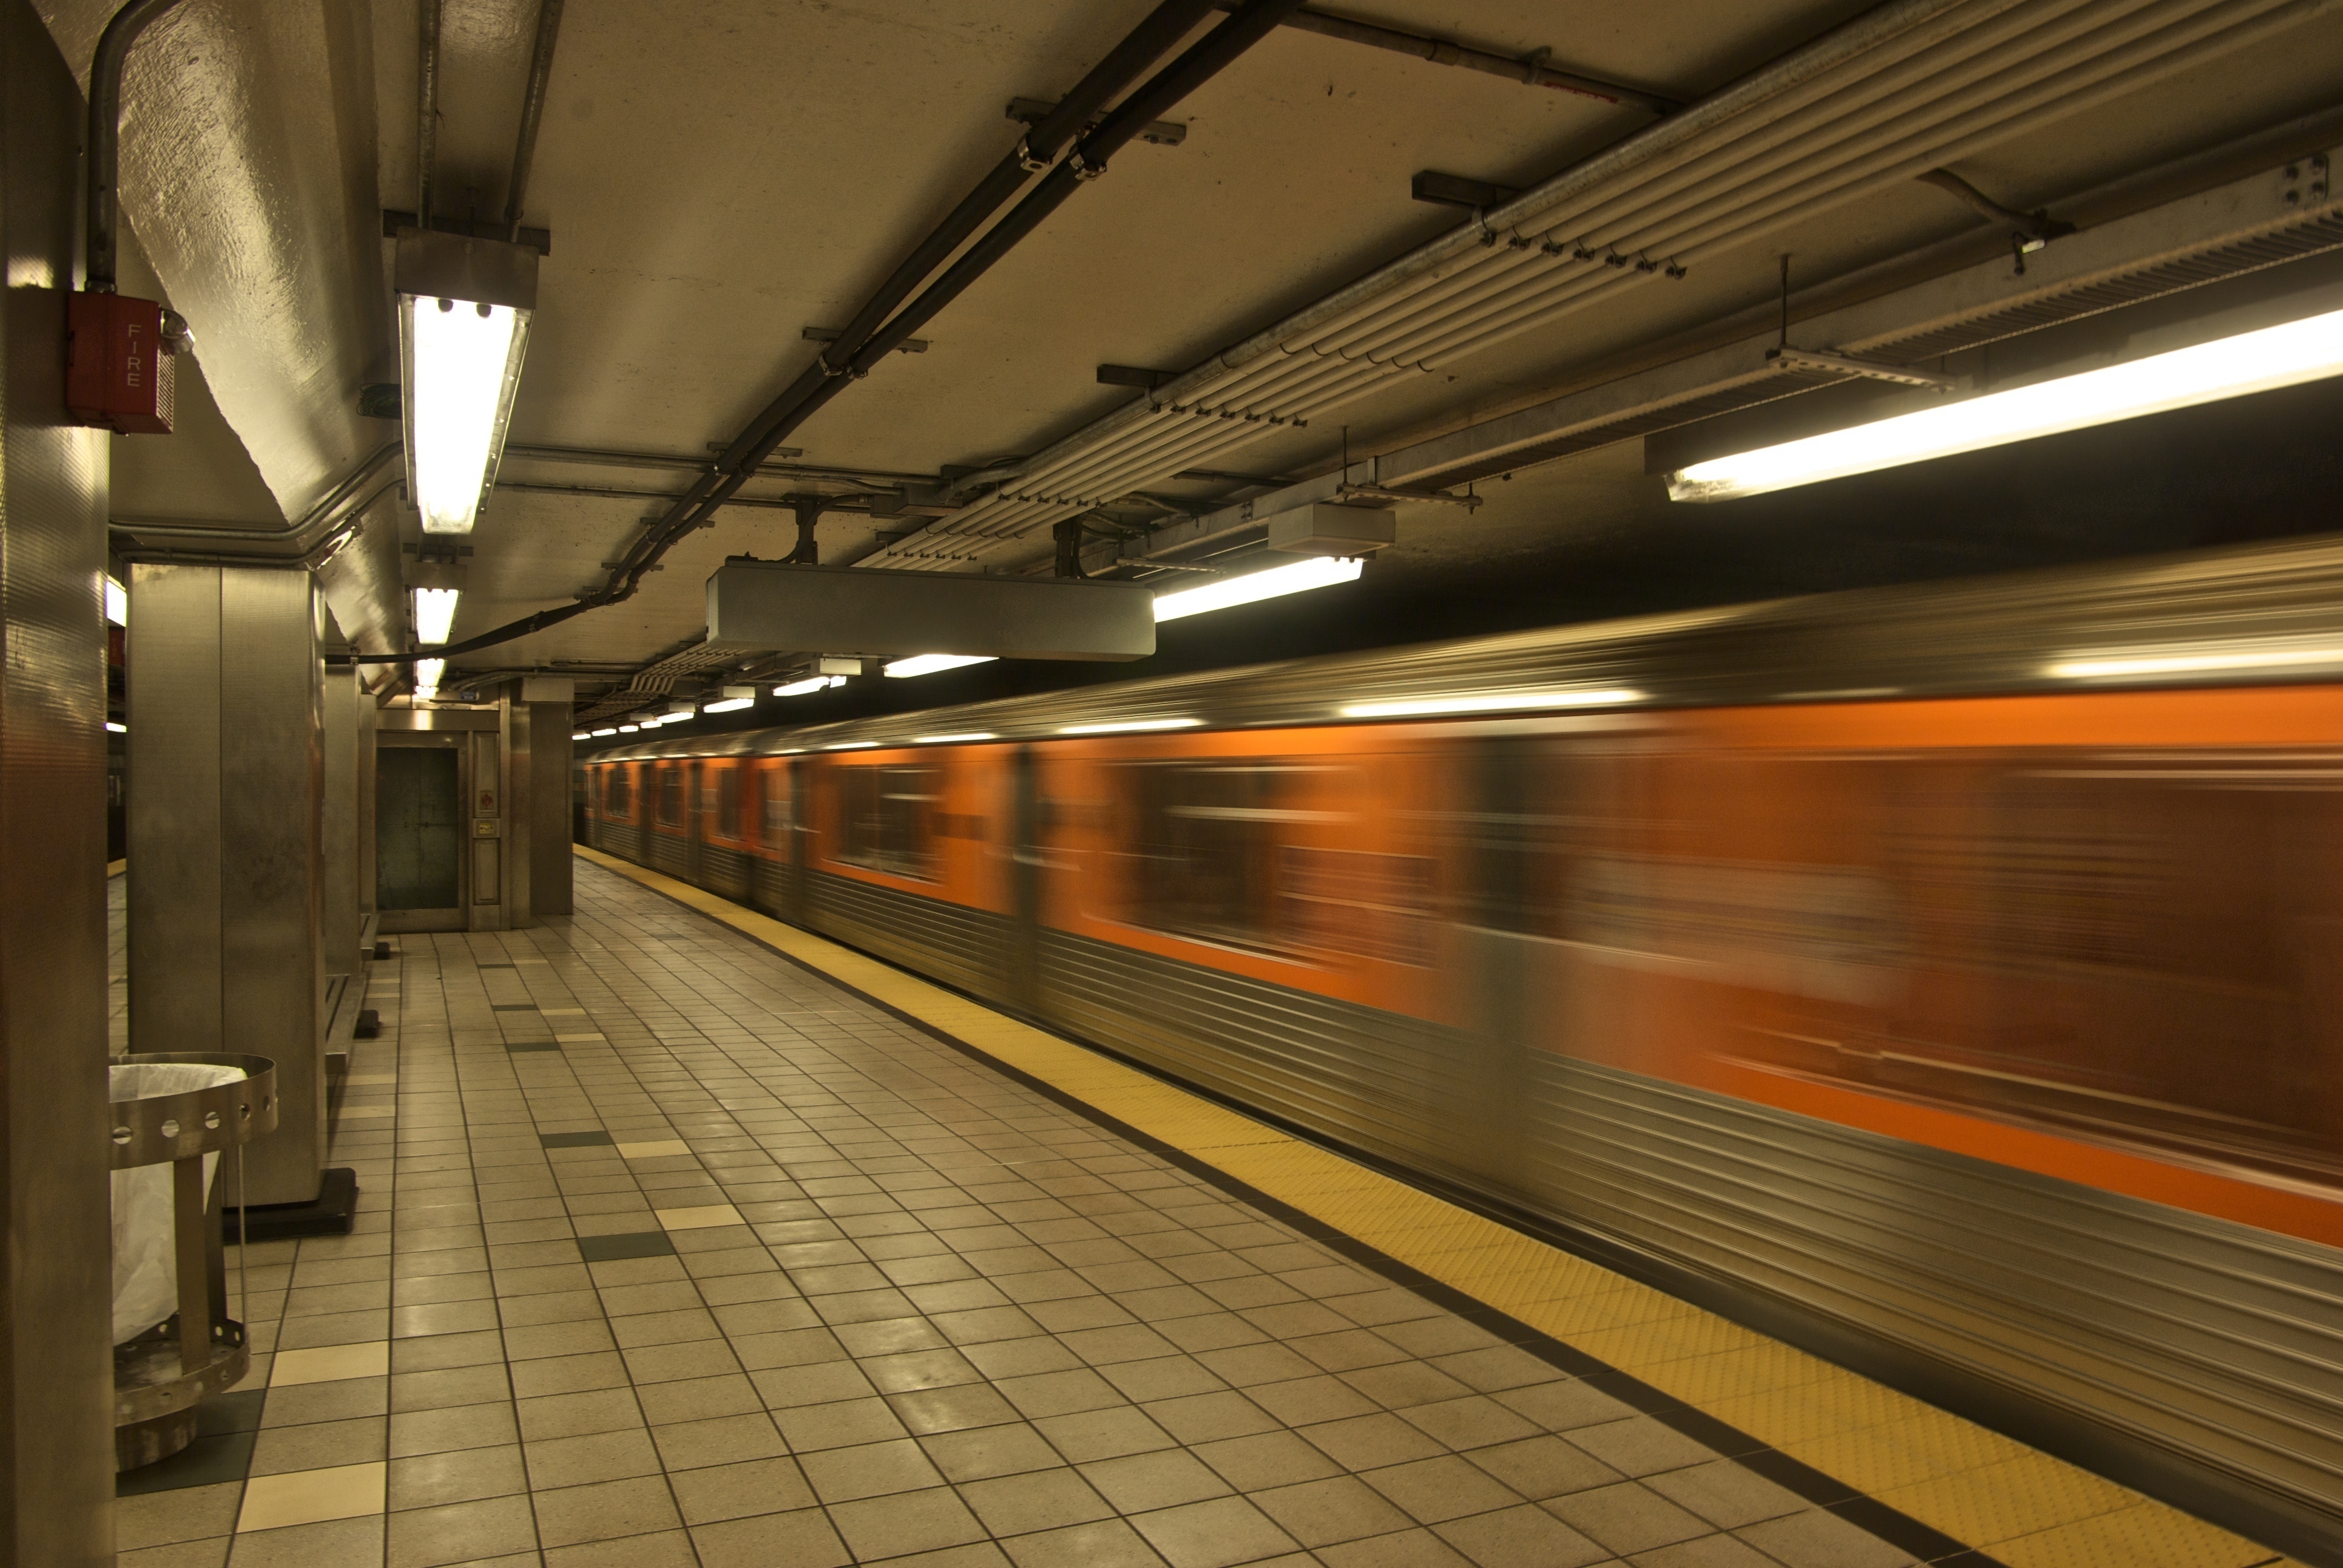 Subway Photos, Download The BEST Free Subway Stock Photos & HD Images